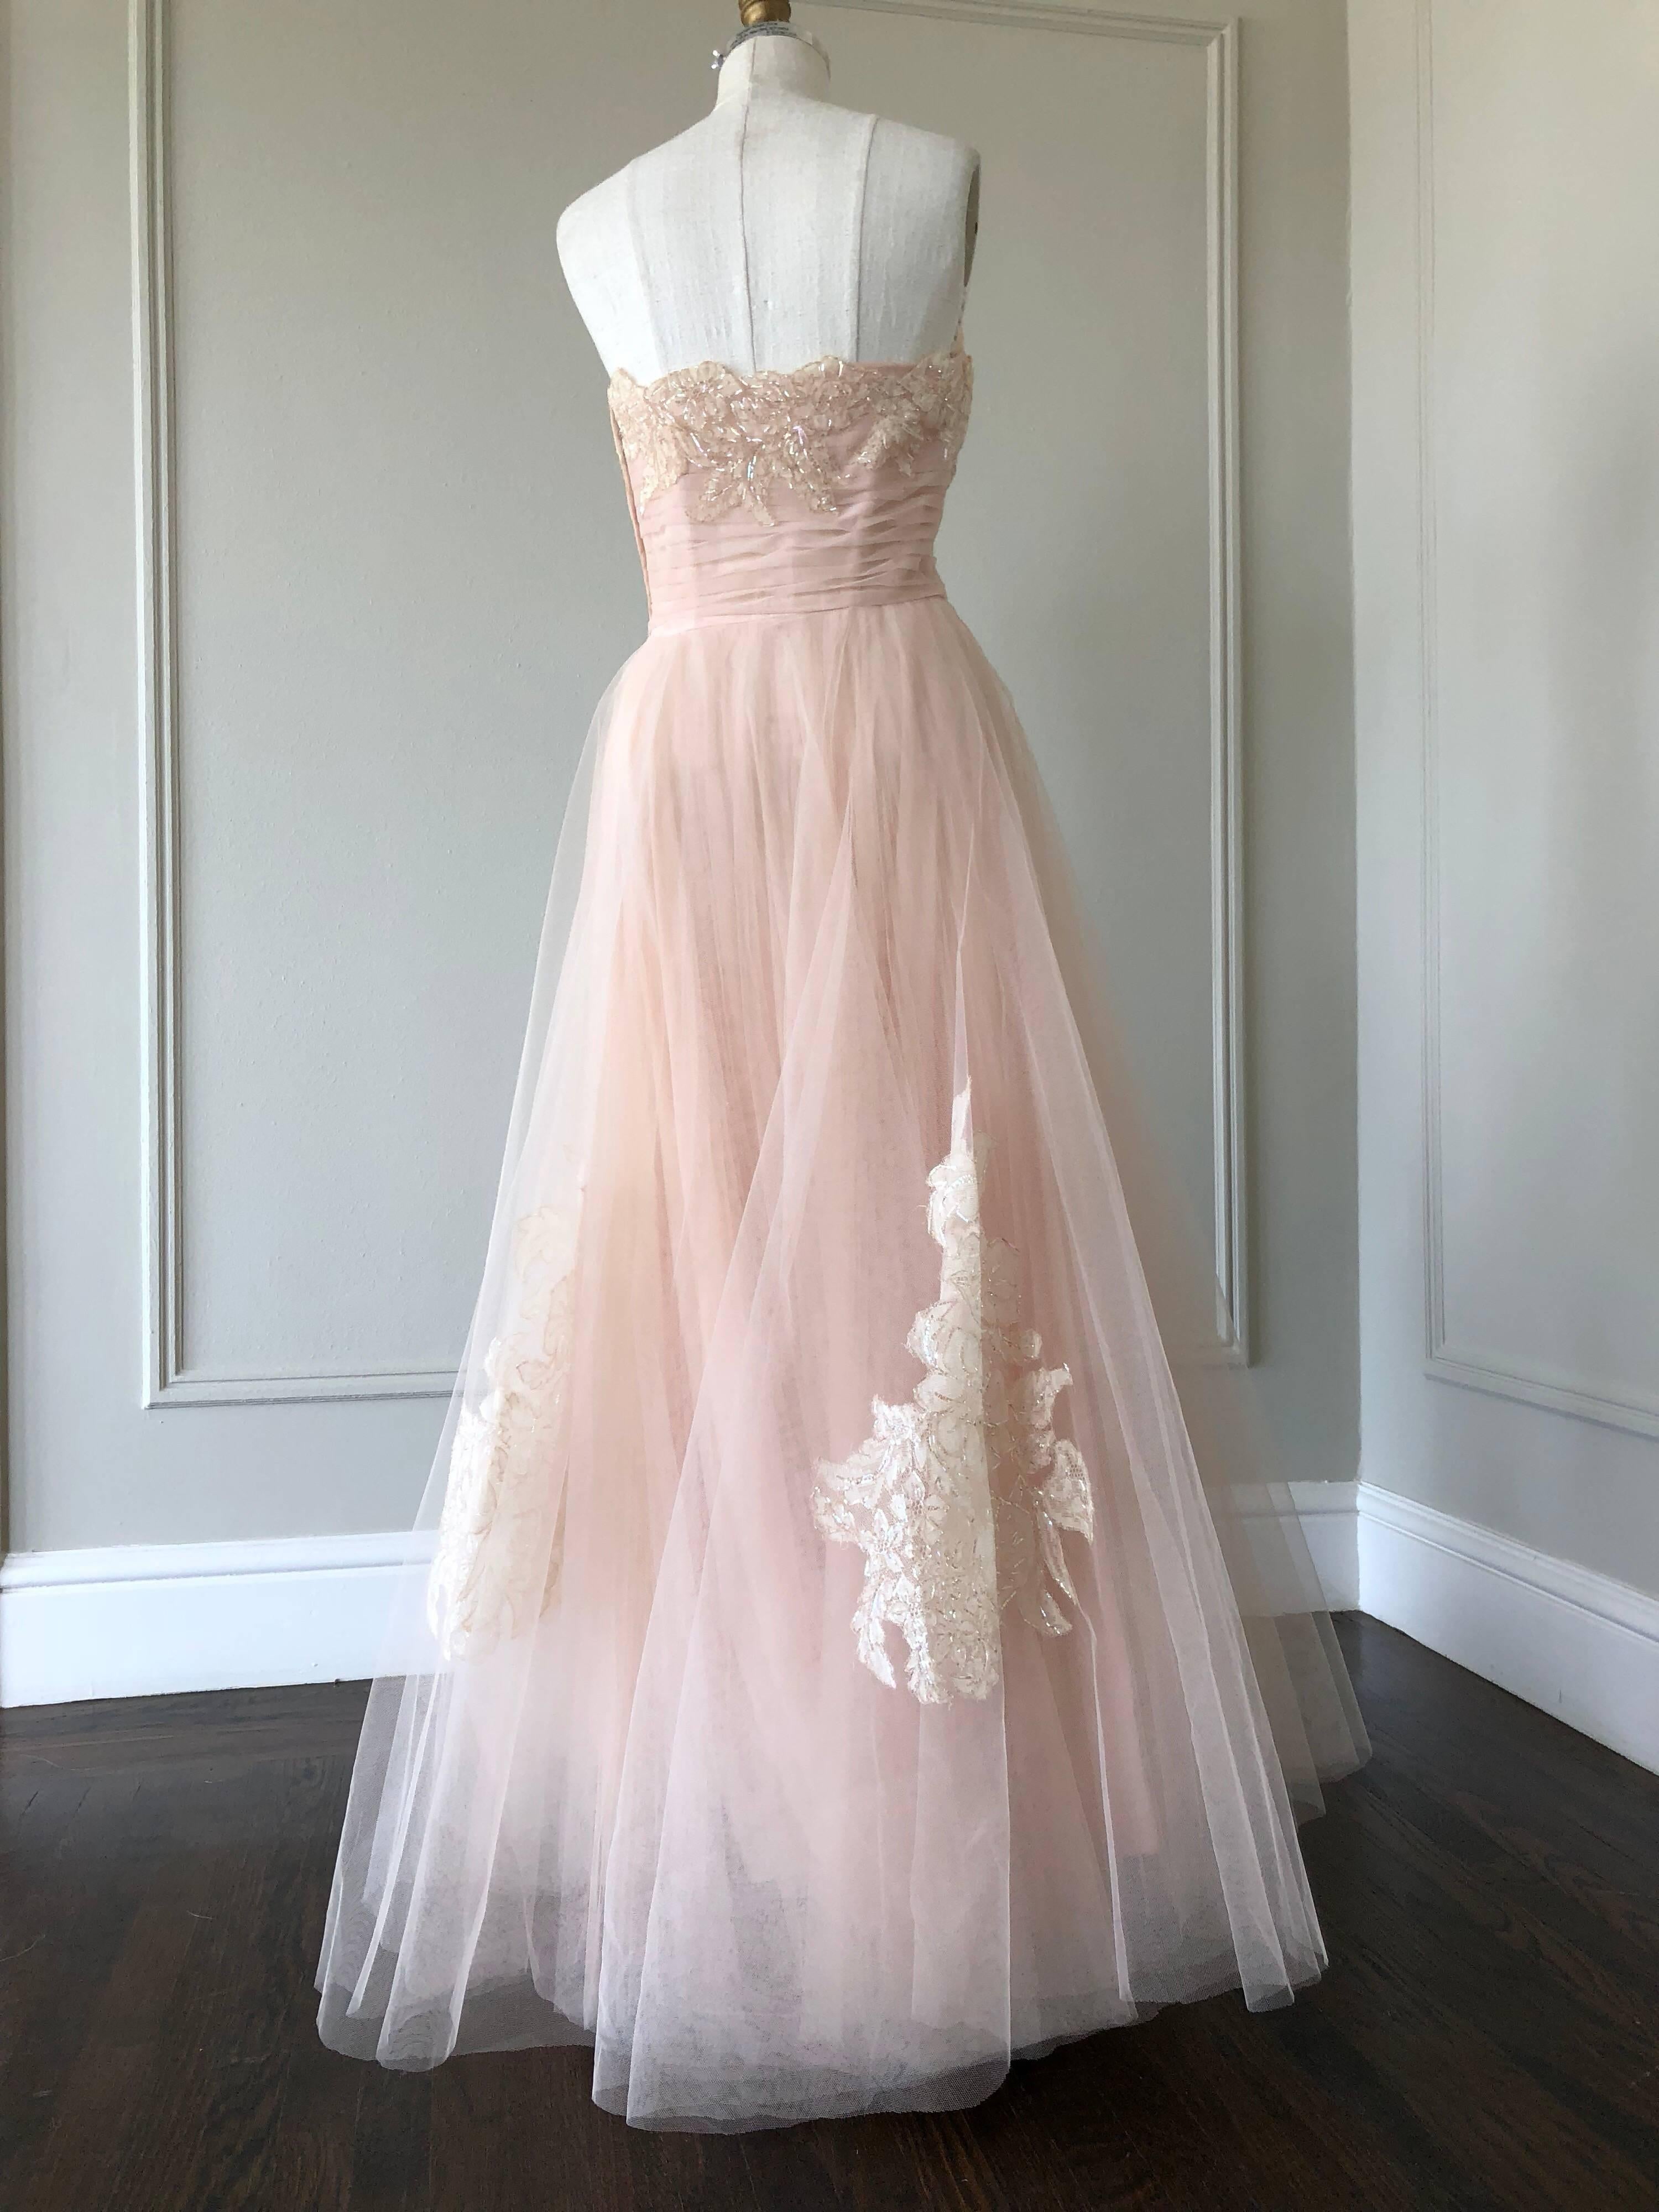 A gorgeous 1950s evening gown in pink champagne tulle with lace and sequin applique at skirt and bodice.  Boned and structured bodice is strapless.  Skirt is layered with three tulle tiers, one of which is completely pleated. 